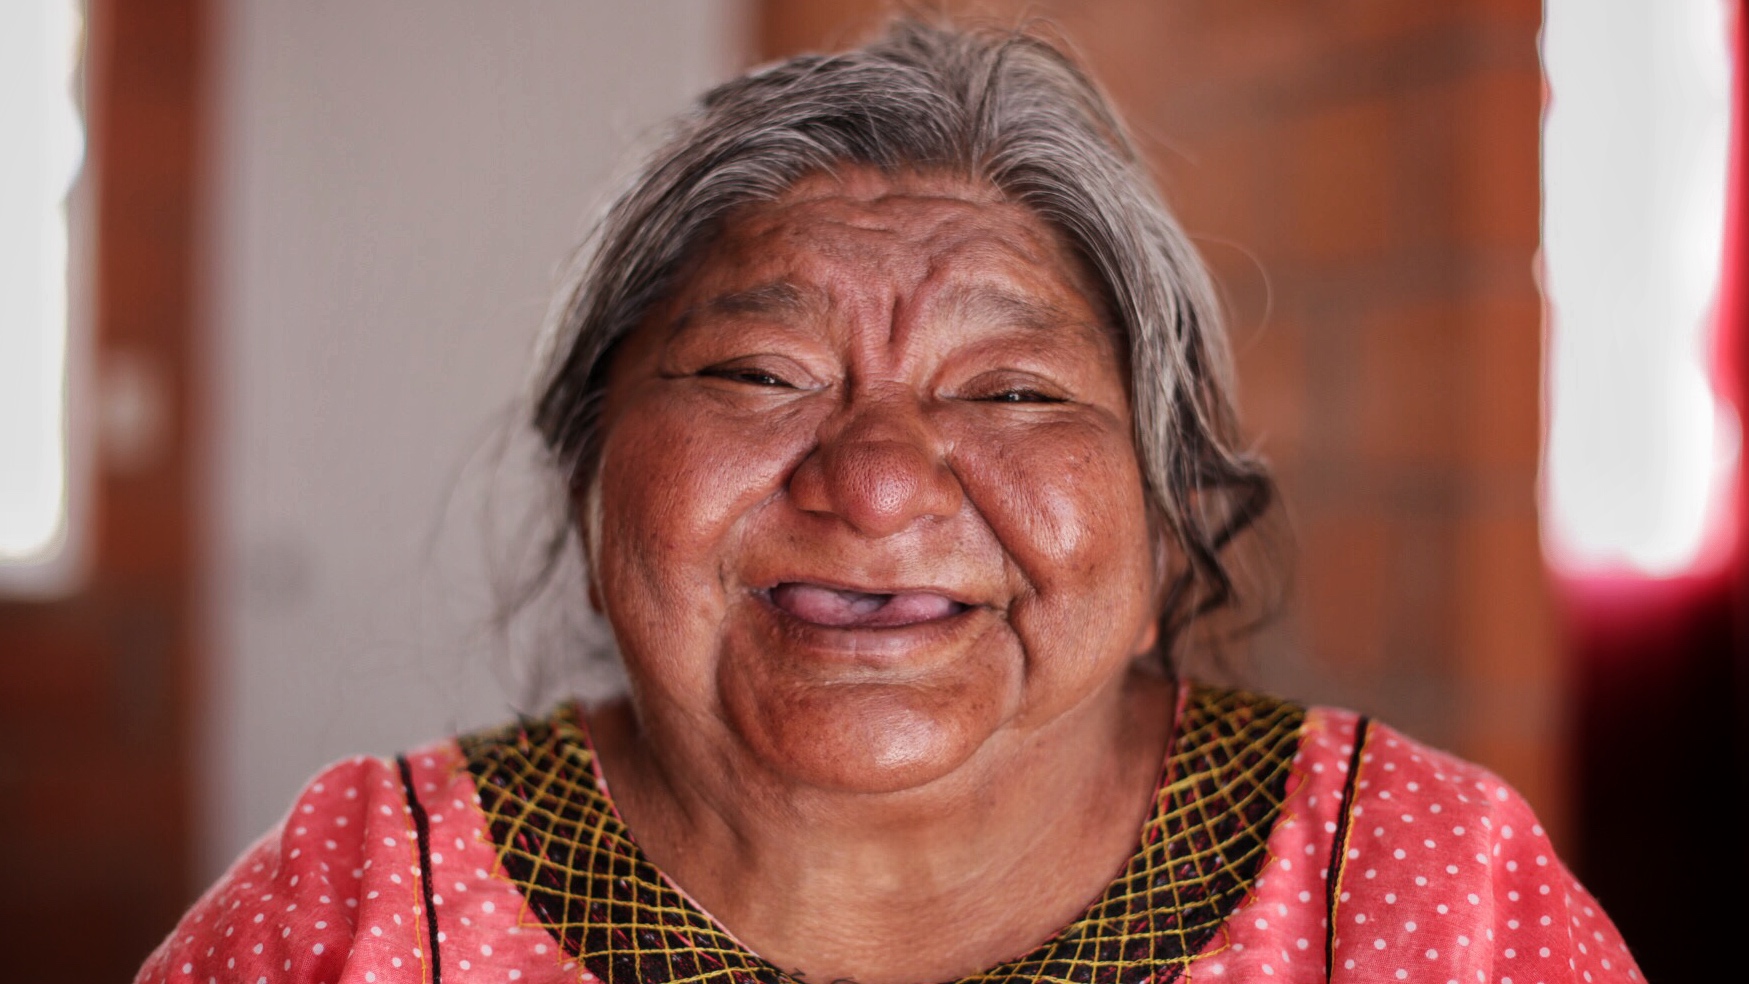 There were people who refused to abandone their happiness, like this indigenous Zapotec woman 